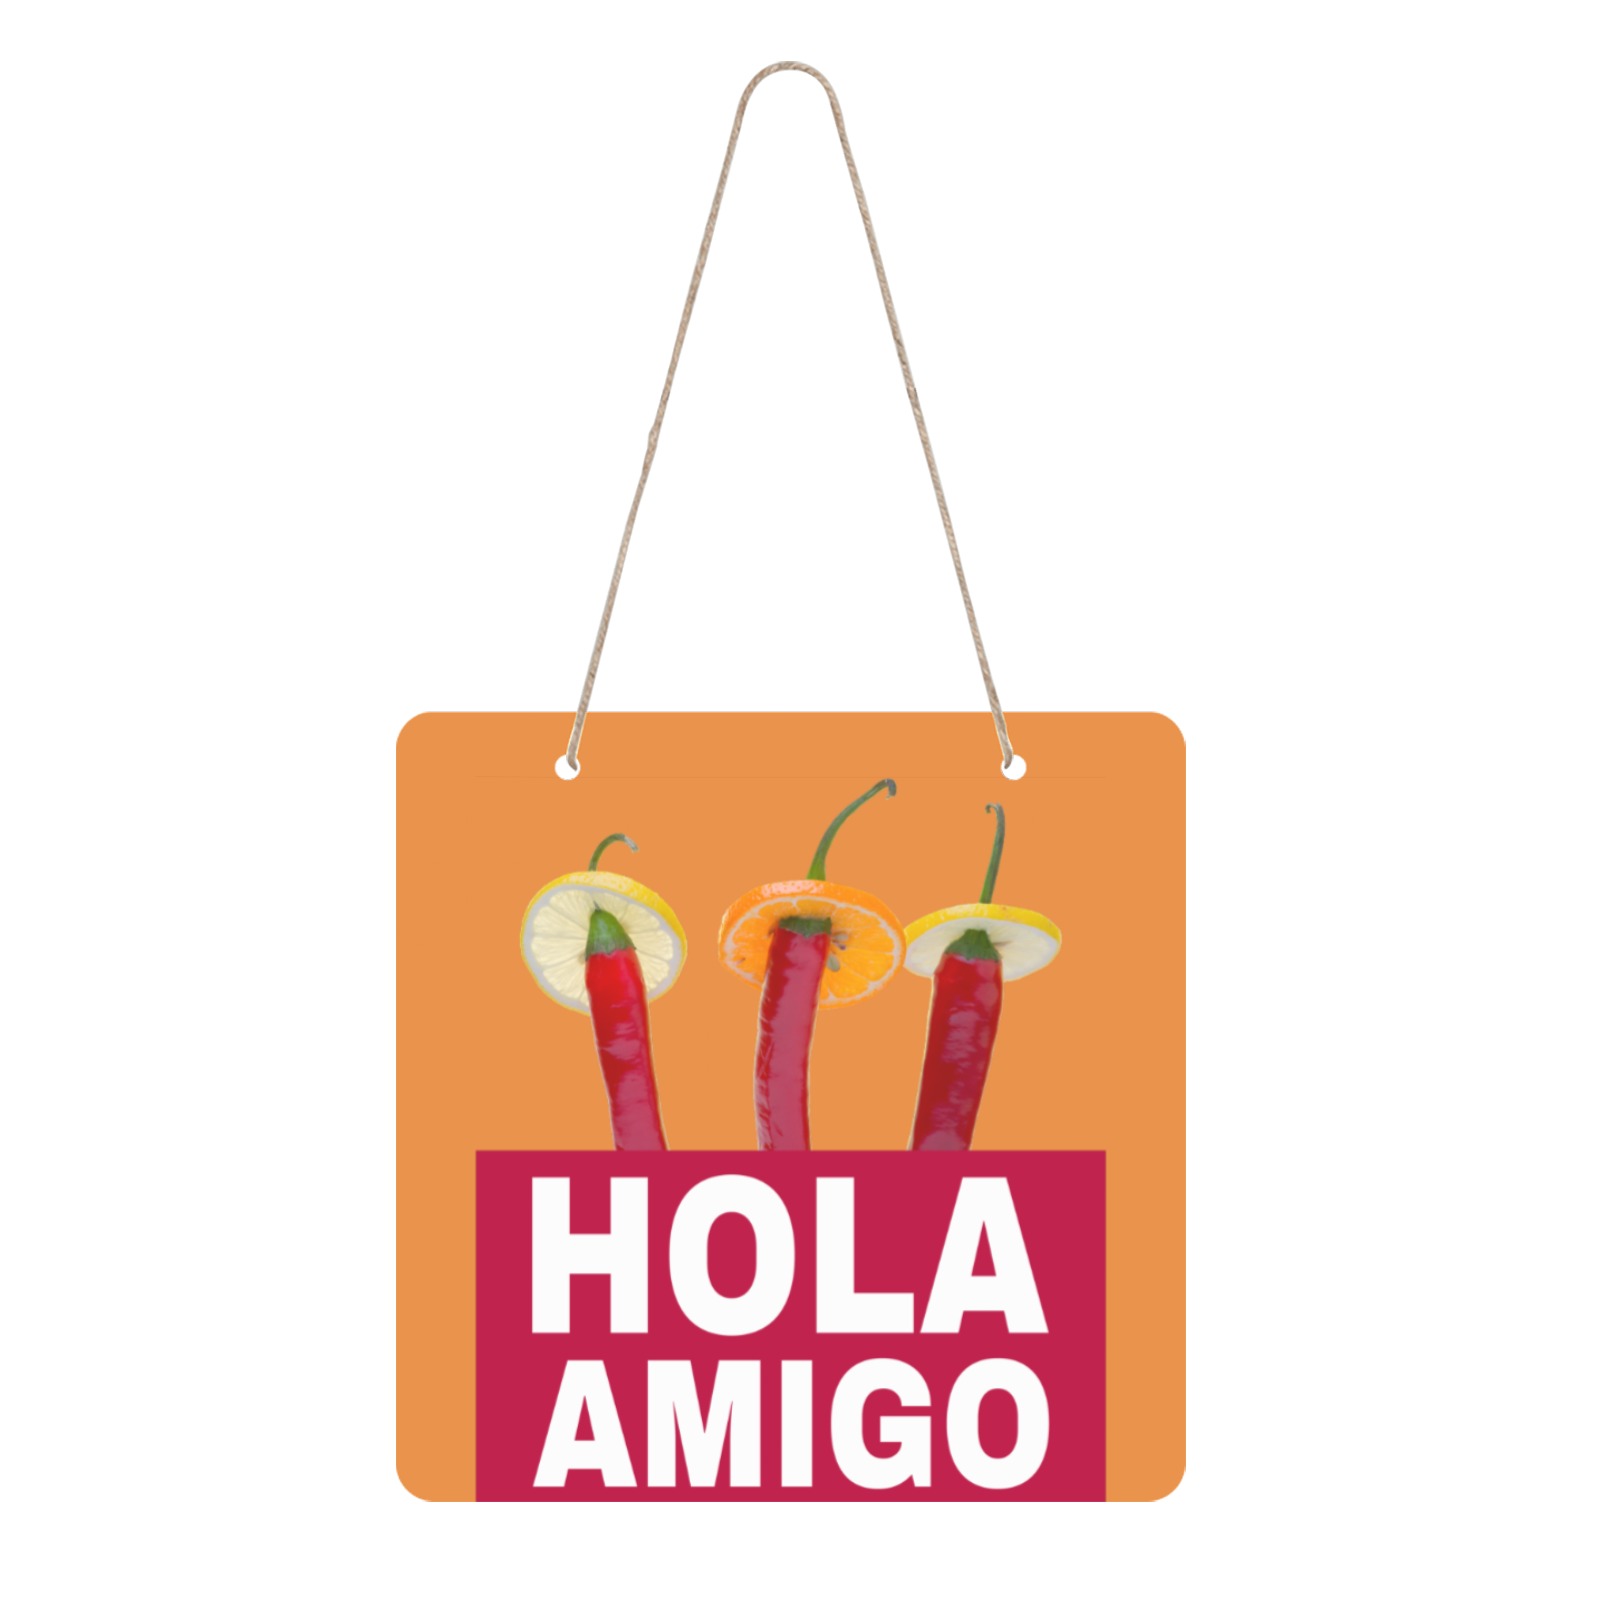 Hola Amigo Three Red Chili Peppers Friend Funny Square Wood Door Hanging Sign